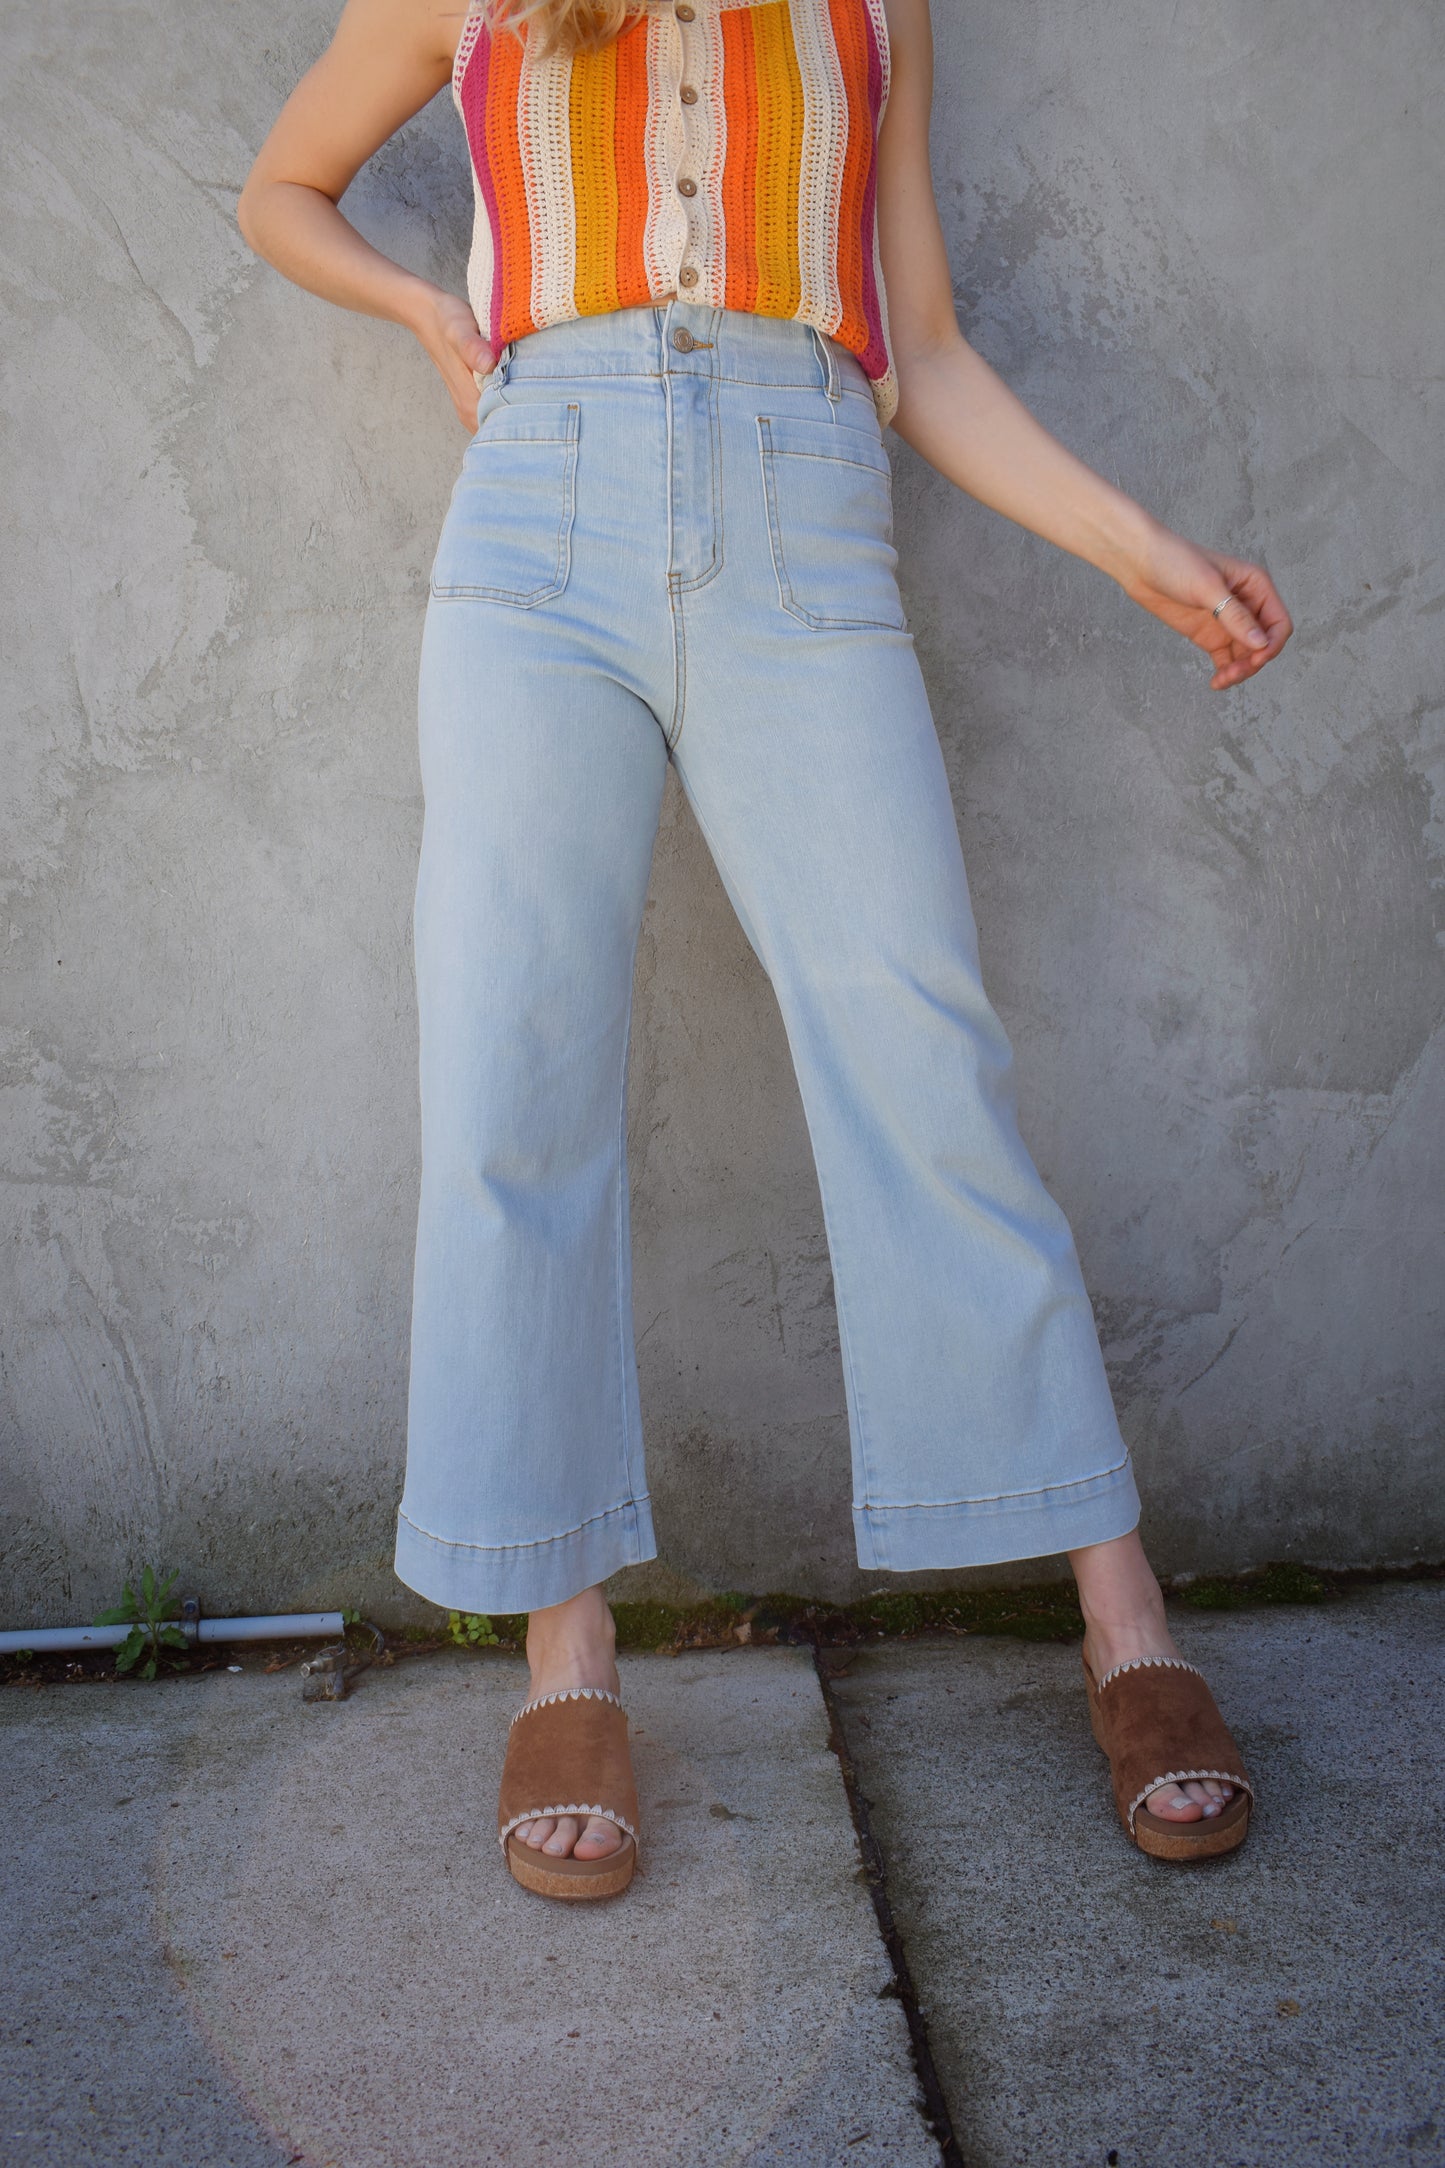 wide leg slightly cropped light wash jeans with front patch pockets. back pockets. zip and button enclosure. no holes. stretch denim. high waisted. seam detailing on back waistband area.